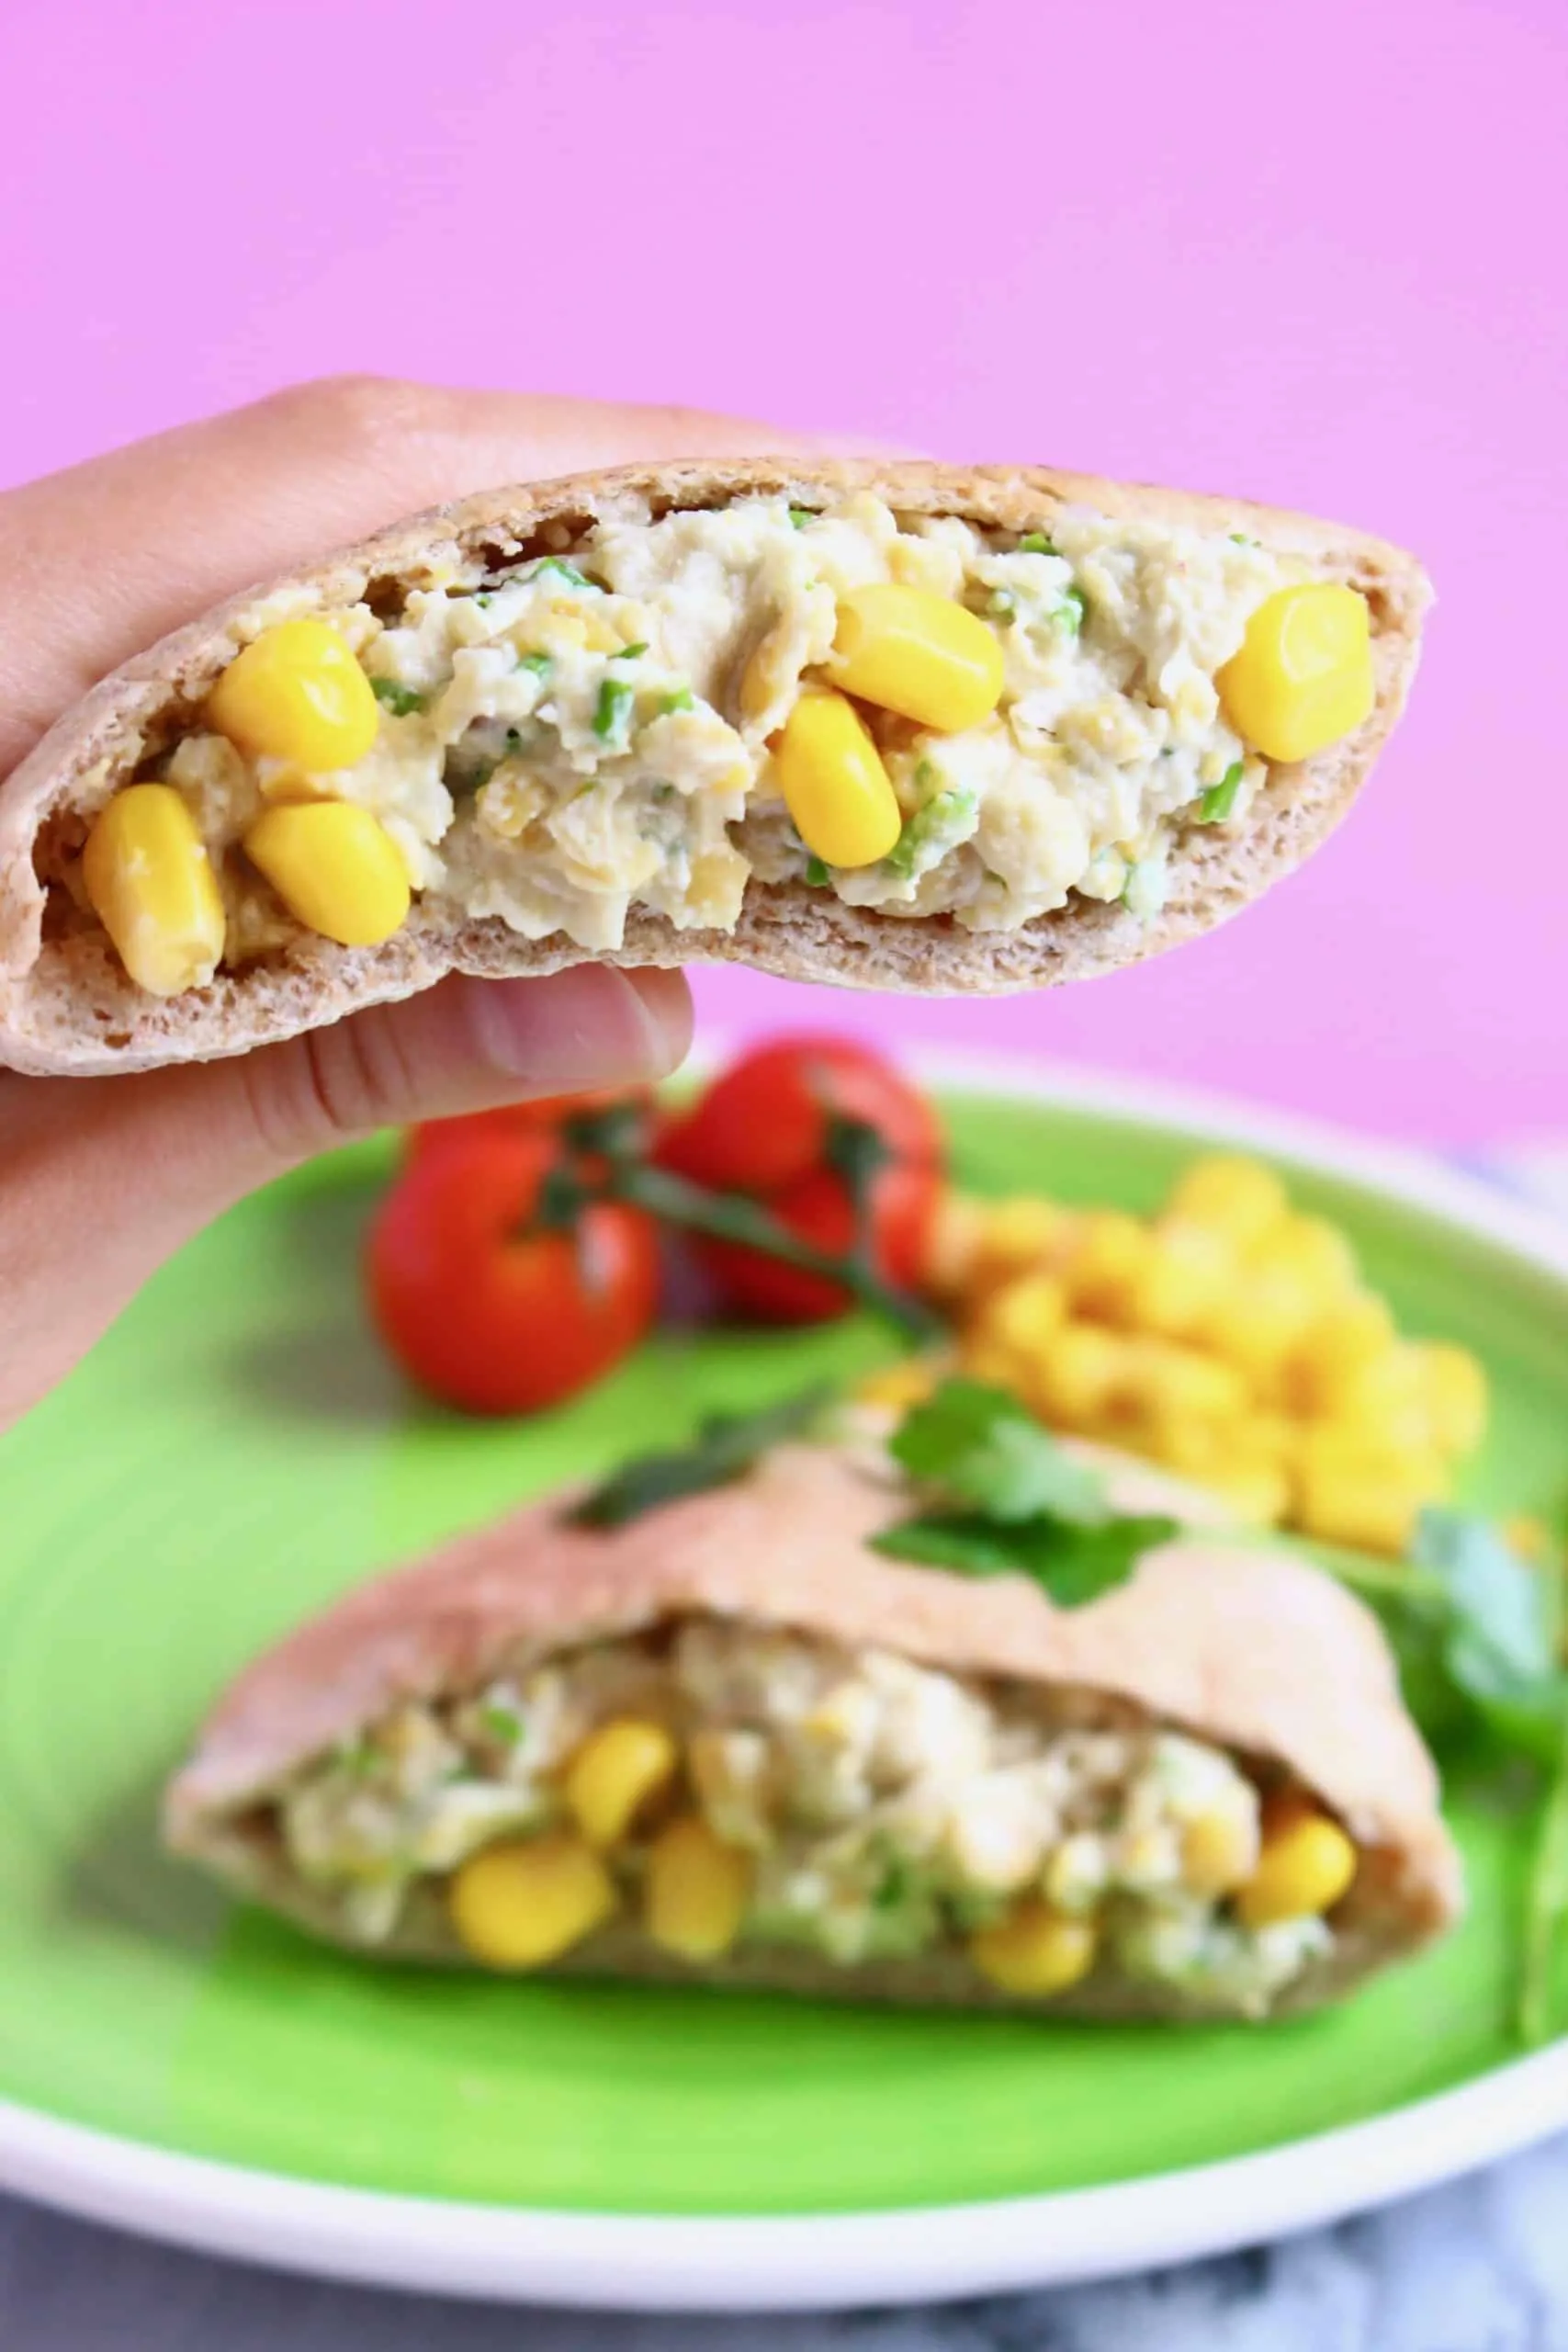 Chickpea mayonnaise sandwich with sweetcorn